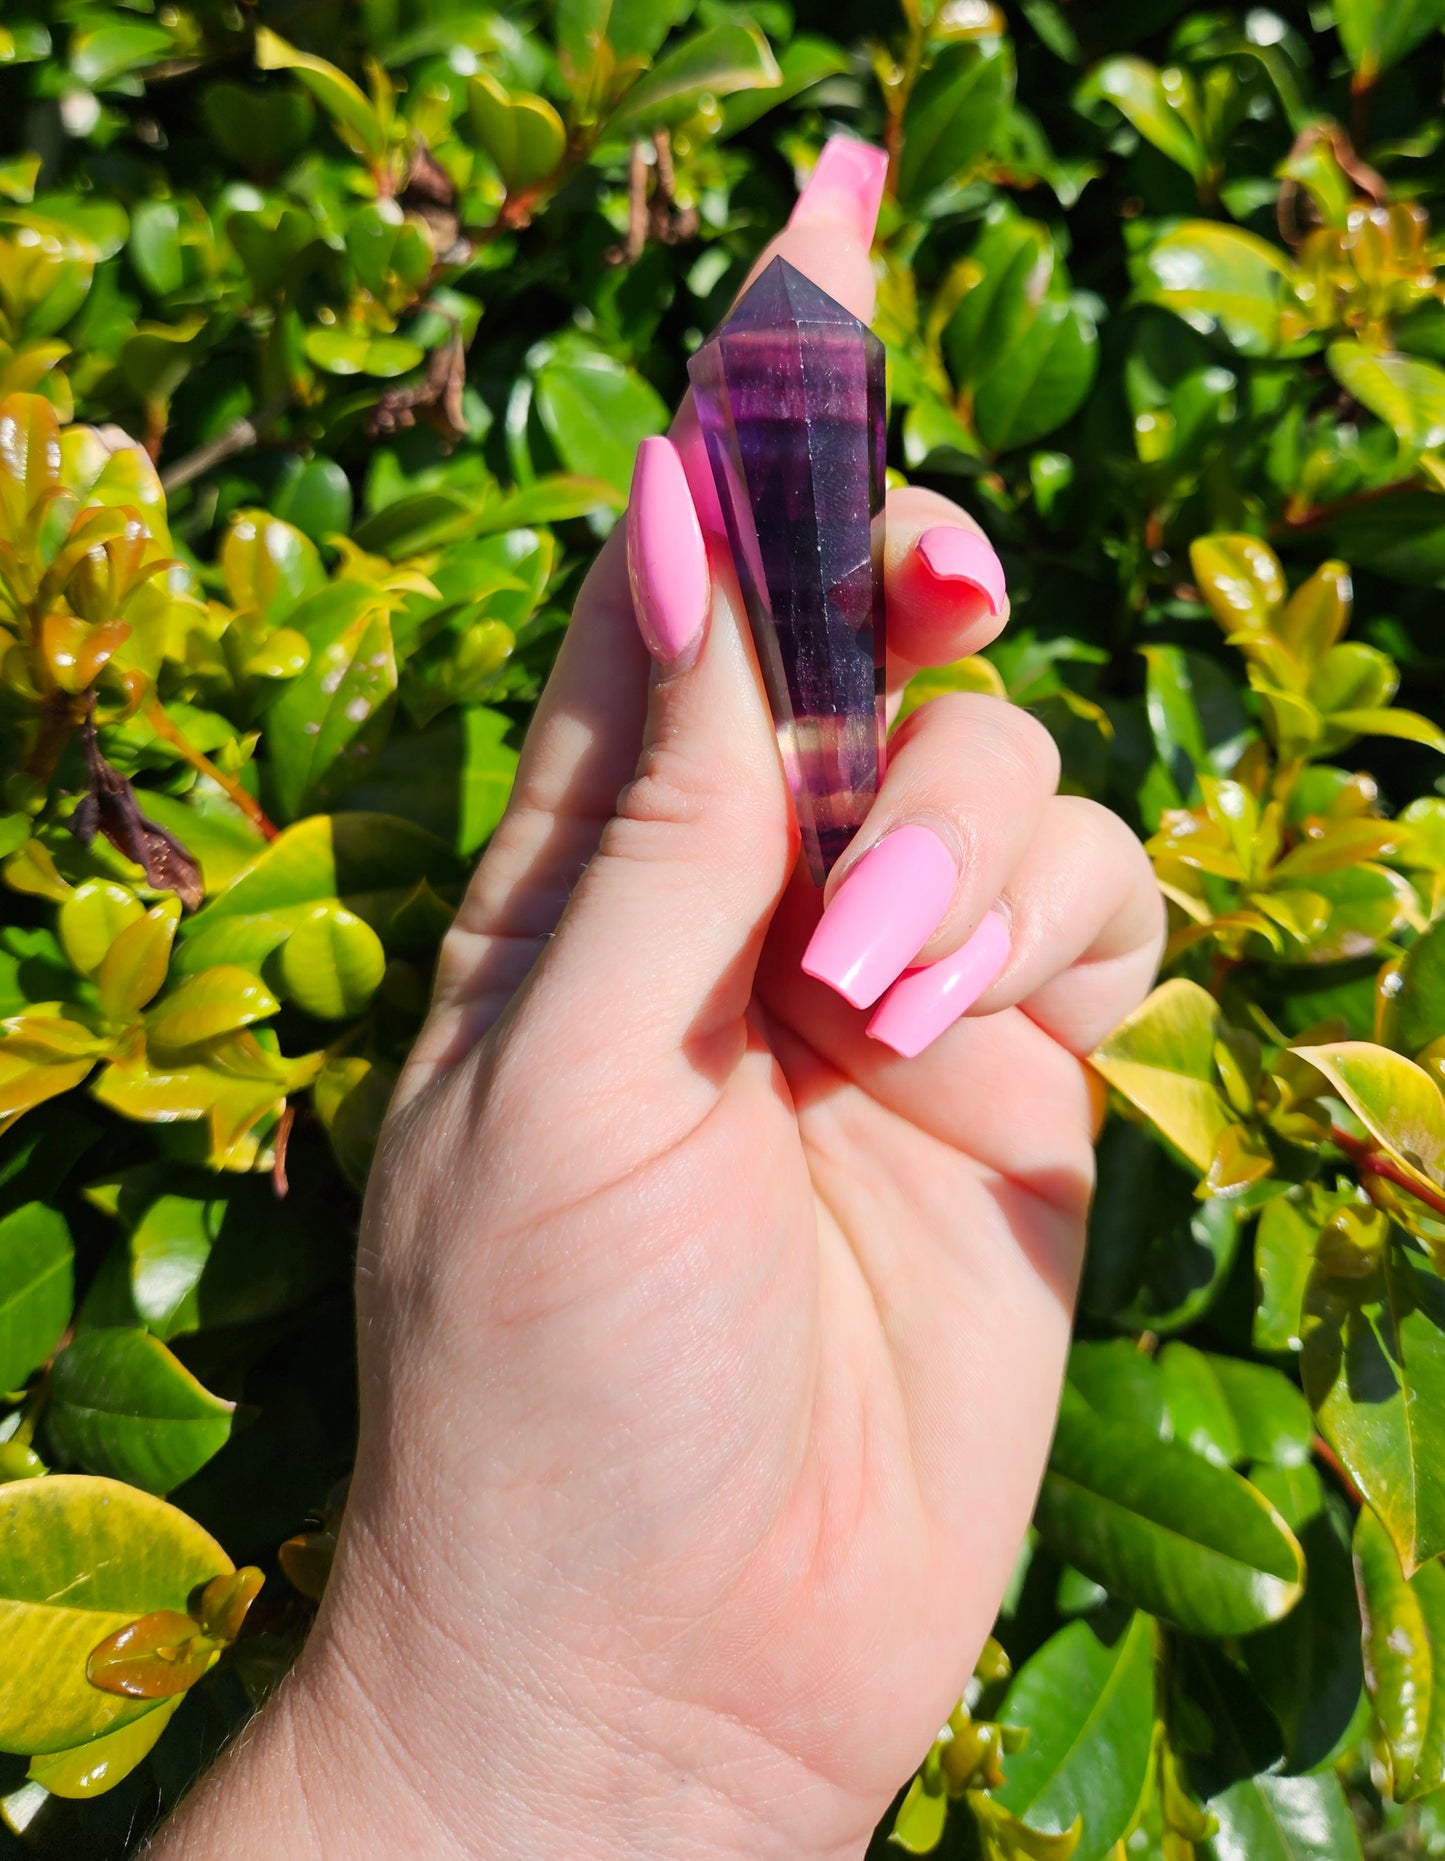 Rainbow fluorite crystal to increase intuition third eye at mind soul sync crystal shop.